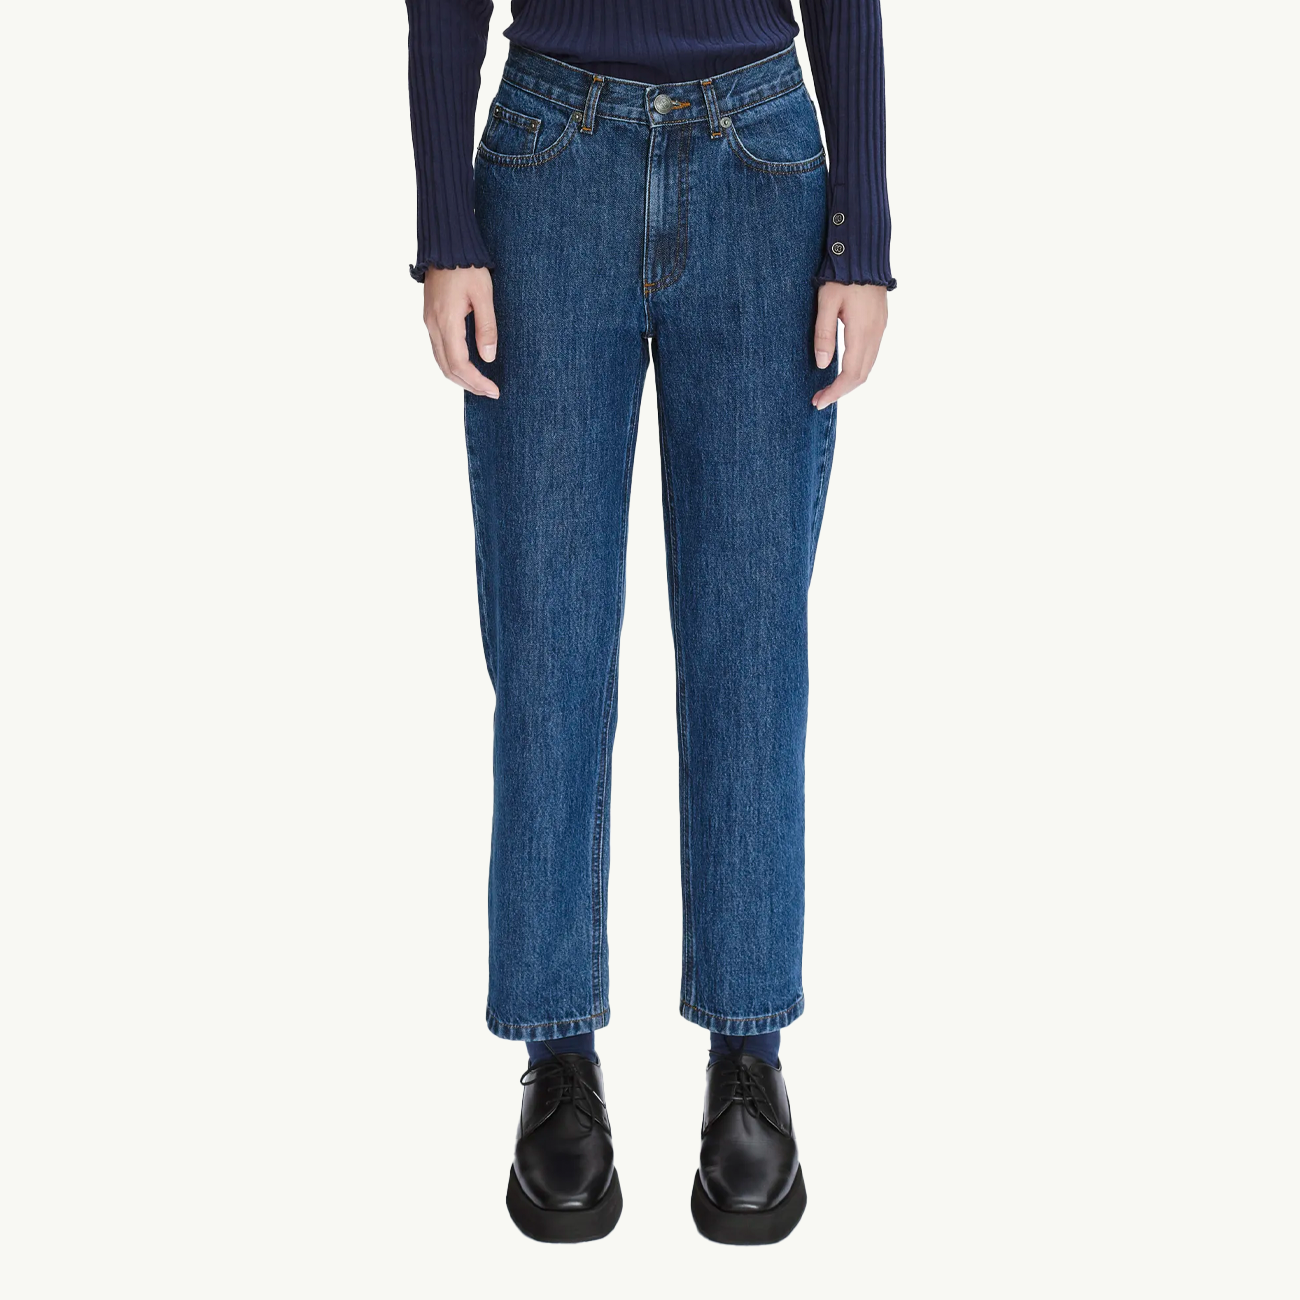 Women's Relaxed Jean - Indigo Washed